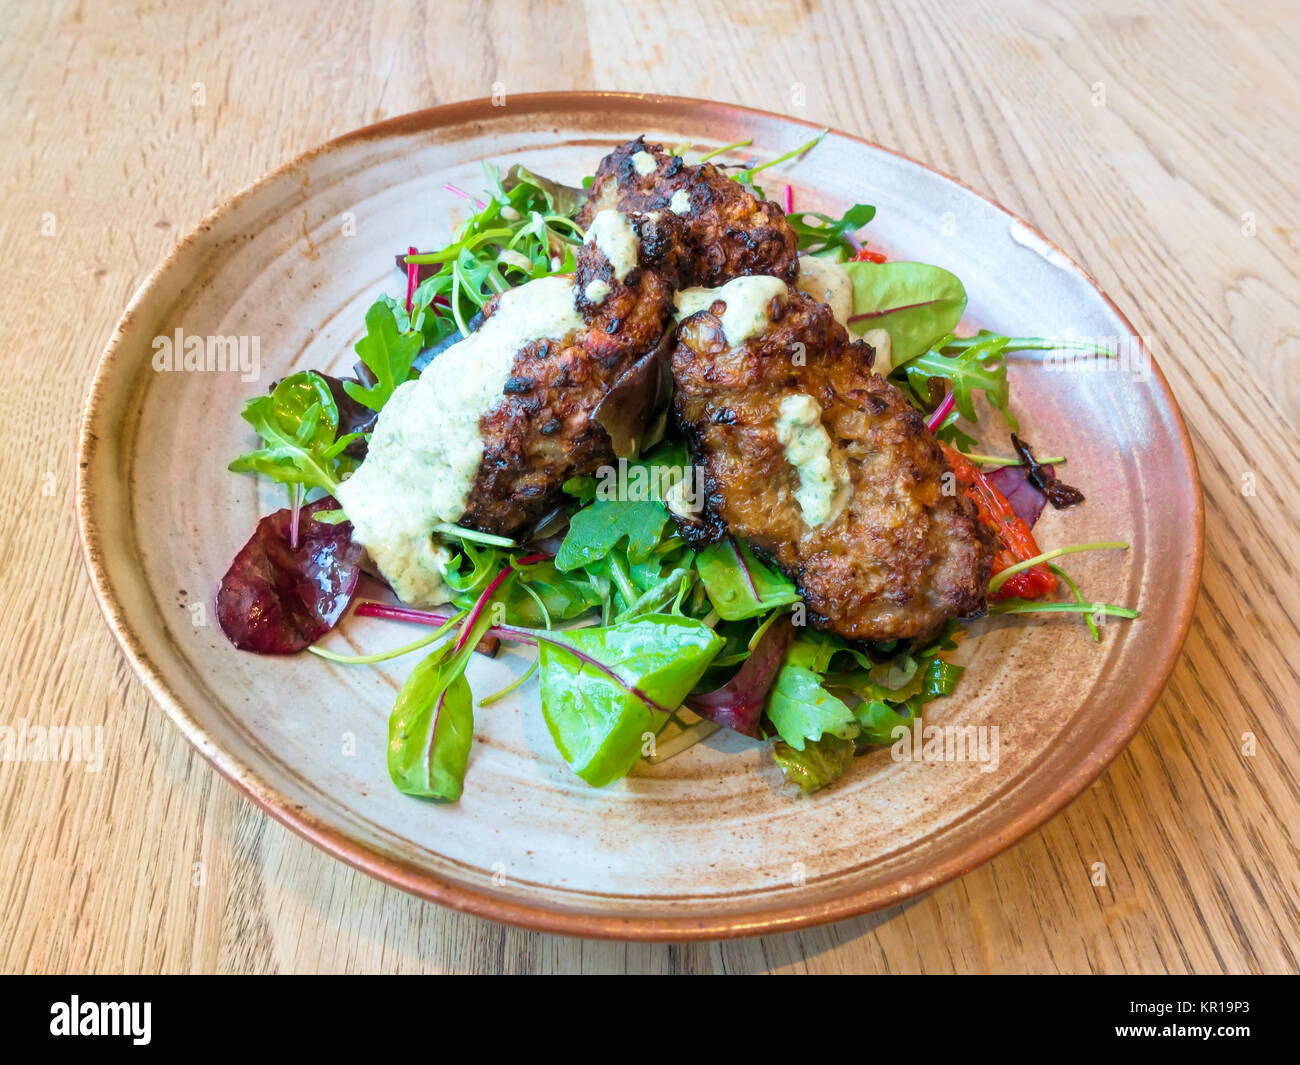 Café lunch Lamb Kofte a Greek dish of lamb and mint meat balls served with a salad Stock Photo